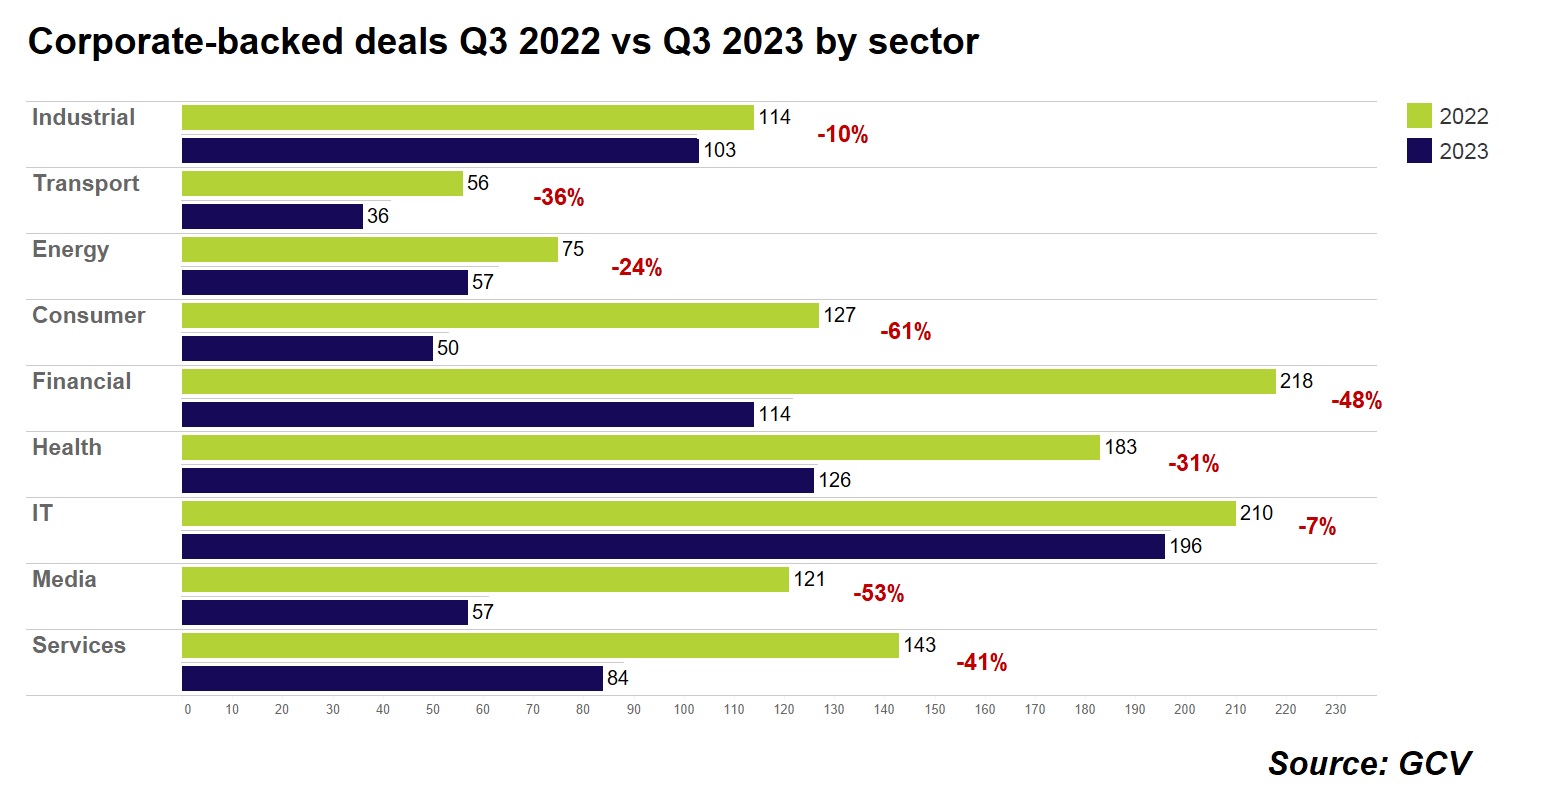 Horizontal bar chart showing corporate-backed deals Q3 2022 vs Q3 2023 by sector. Source: GCV